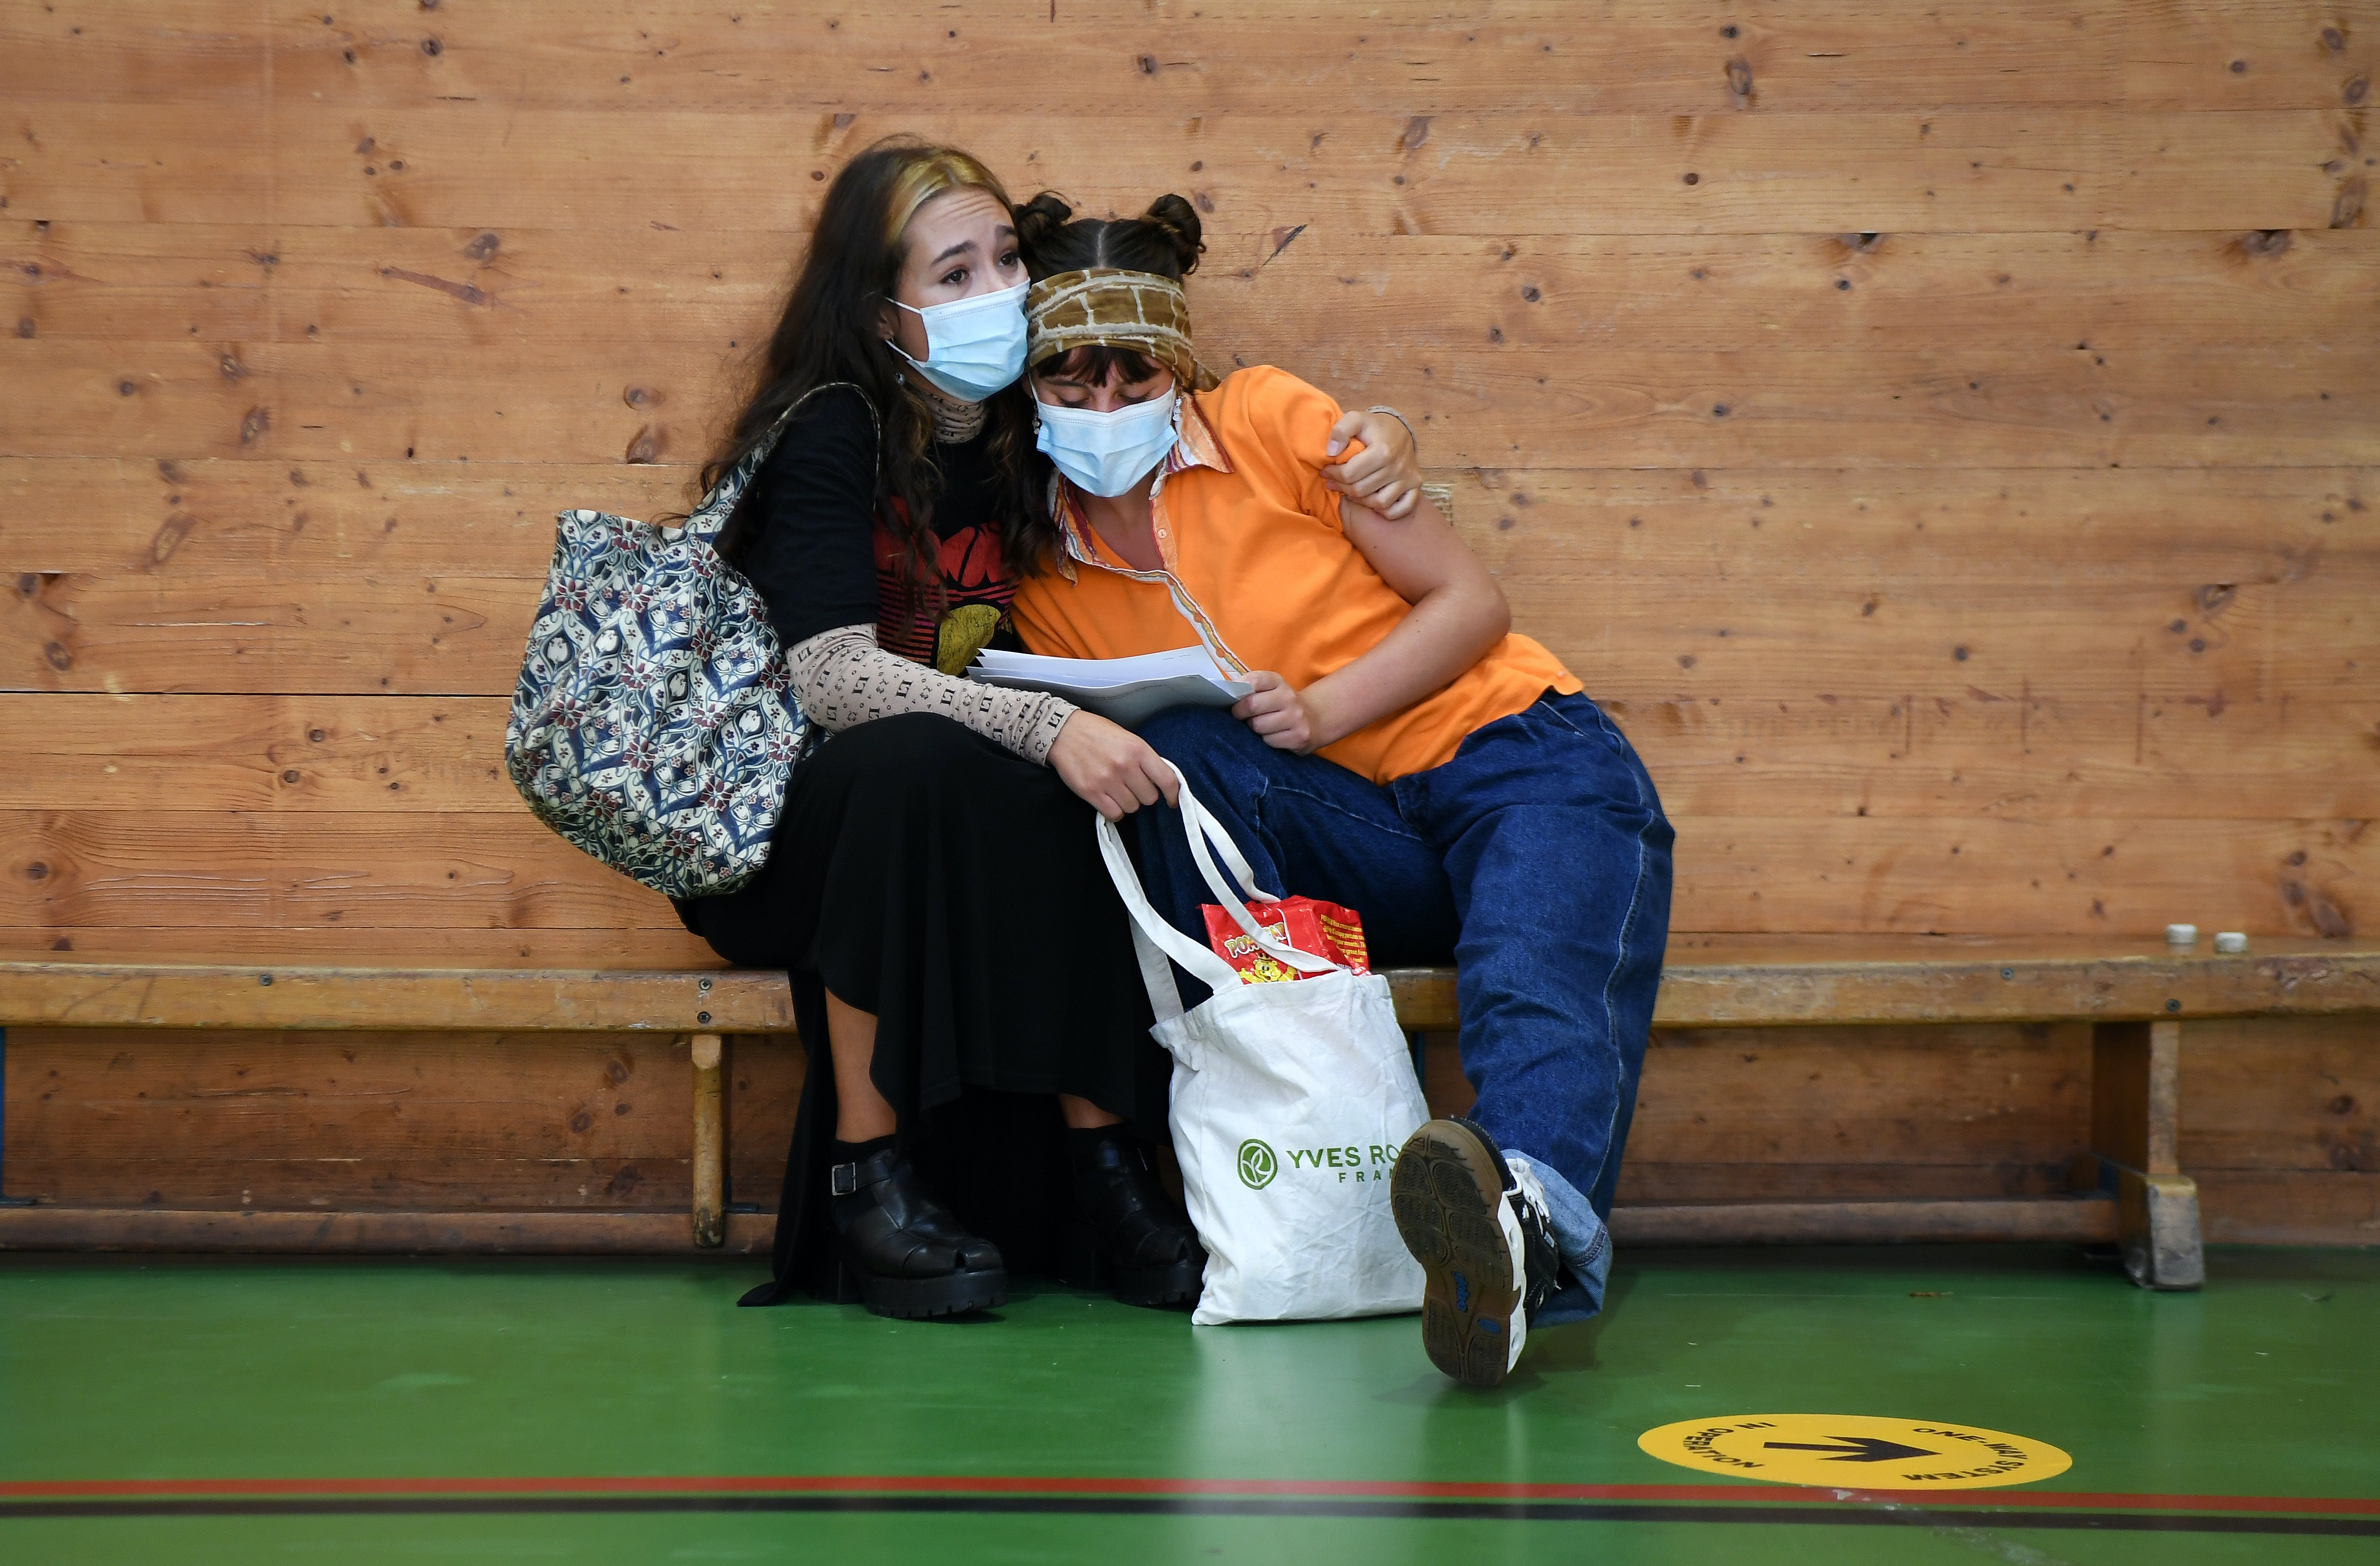 Two young people wearing masks.